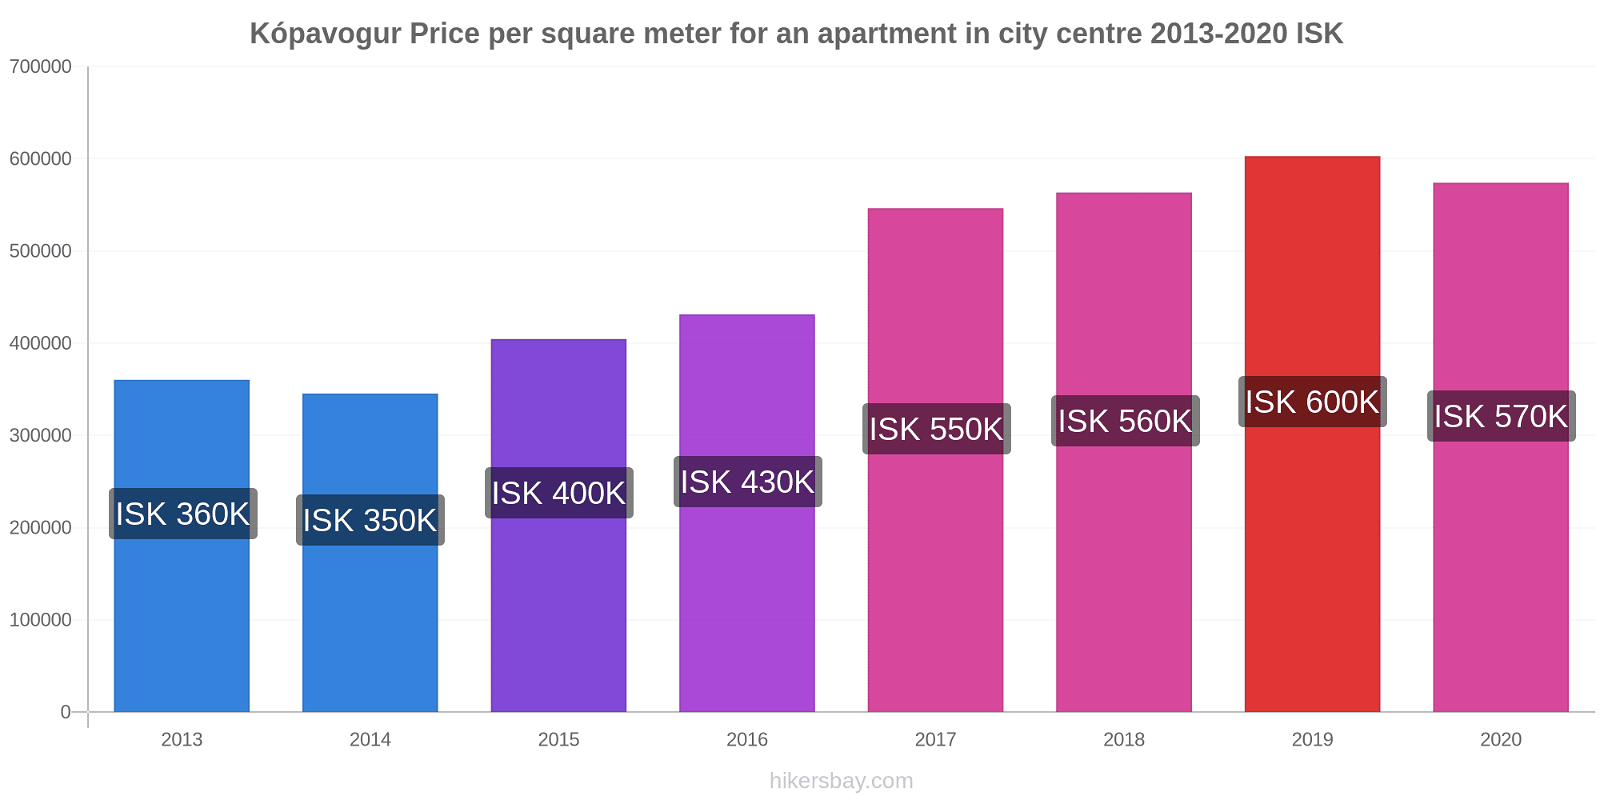 Kópavogur price changes Price per square meter for an apartment in city centre hikersbay.com